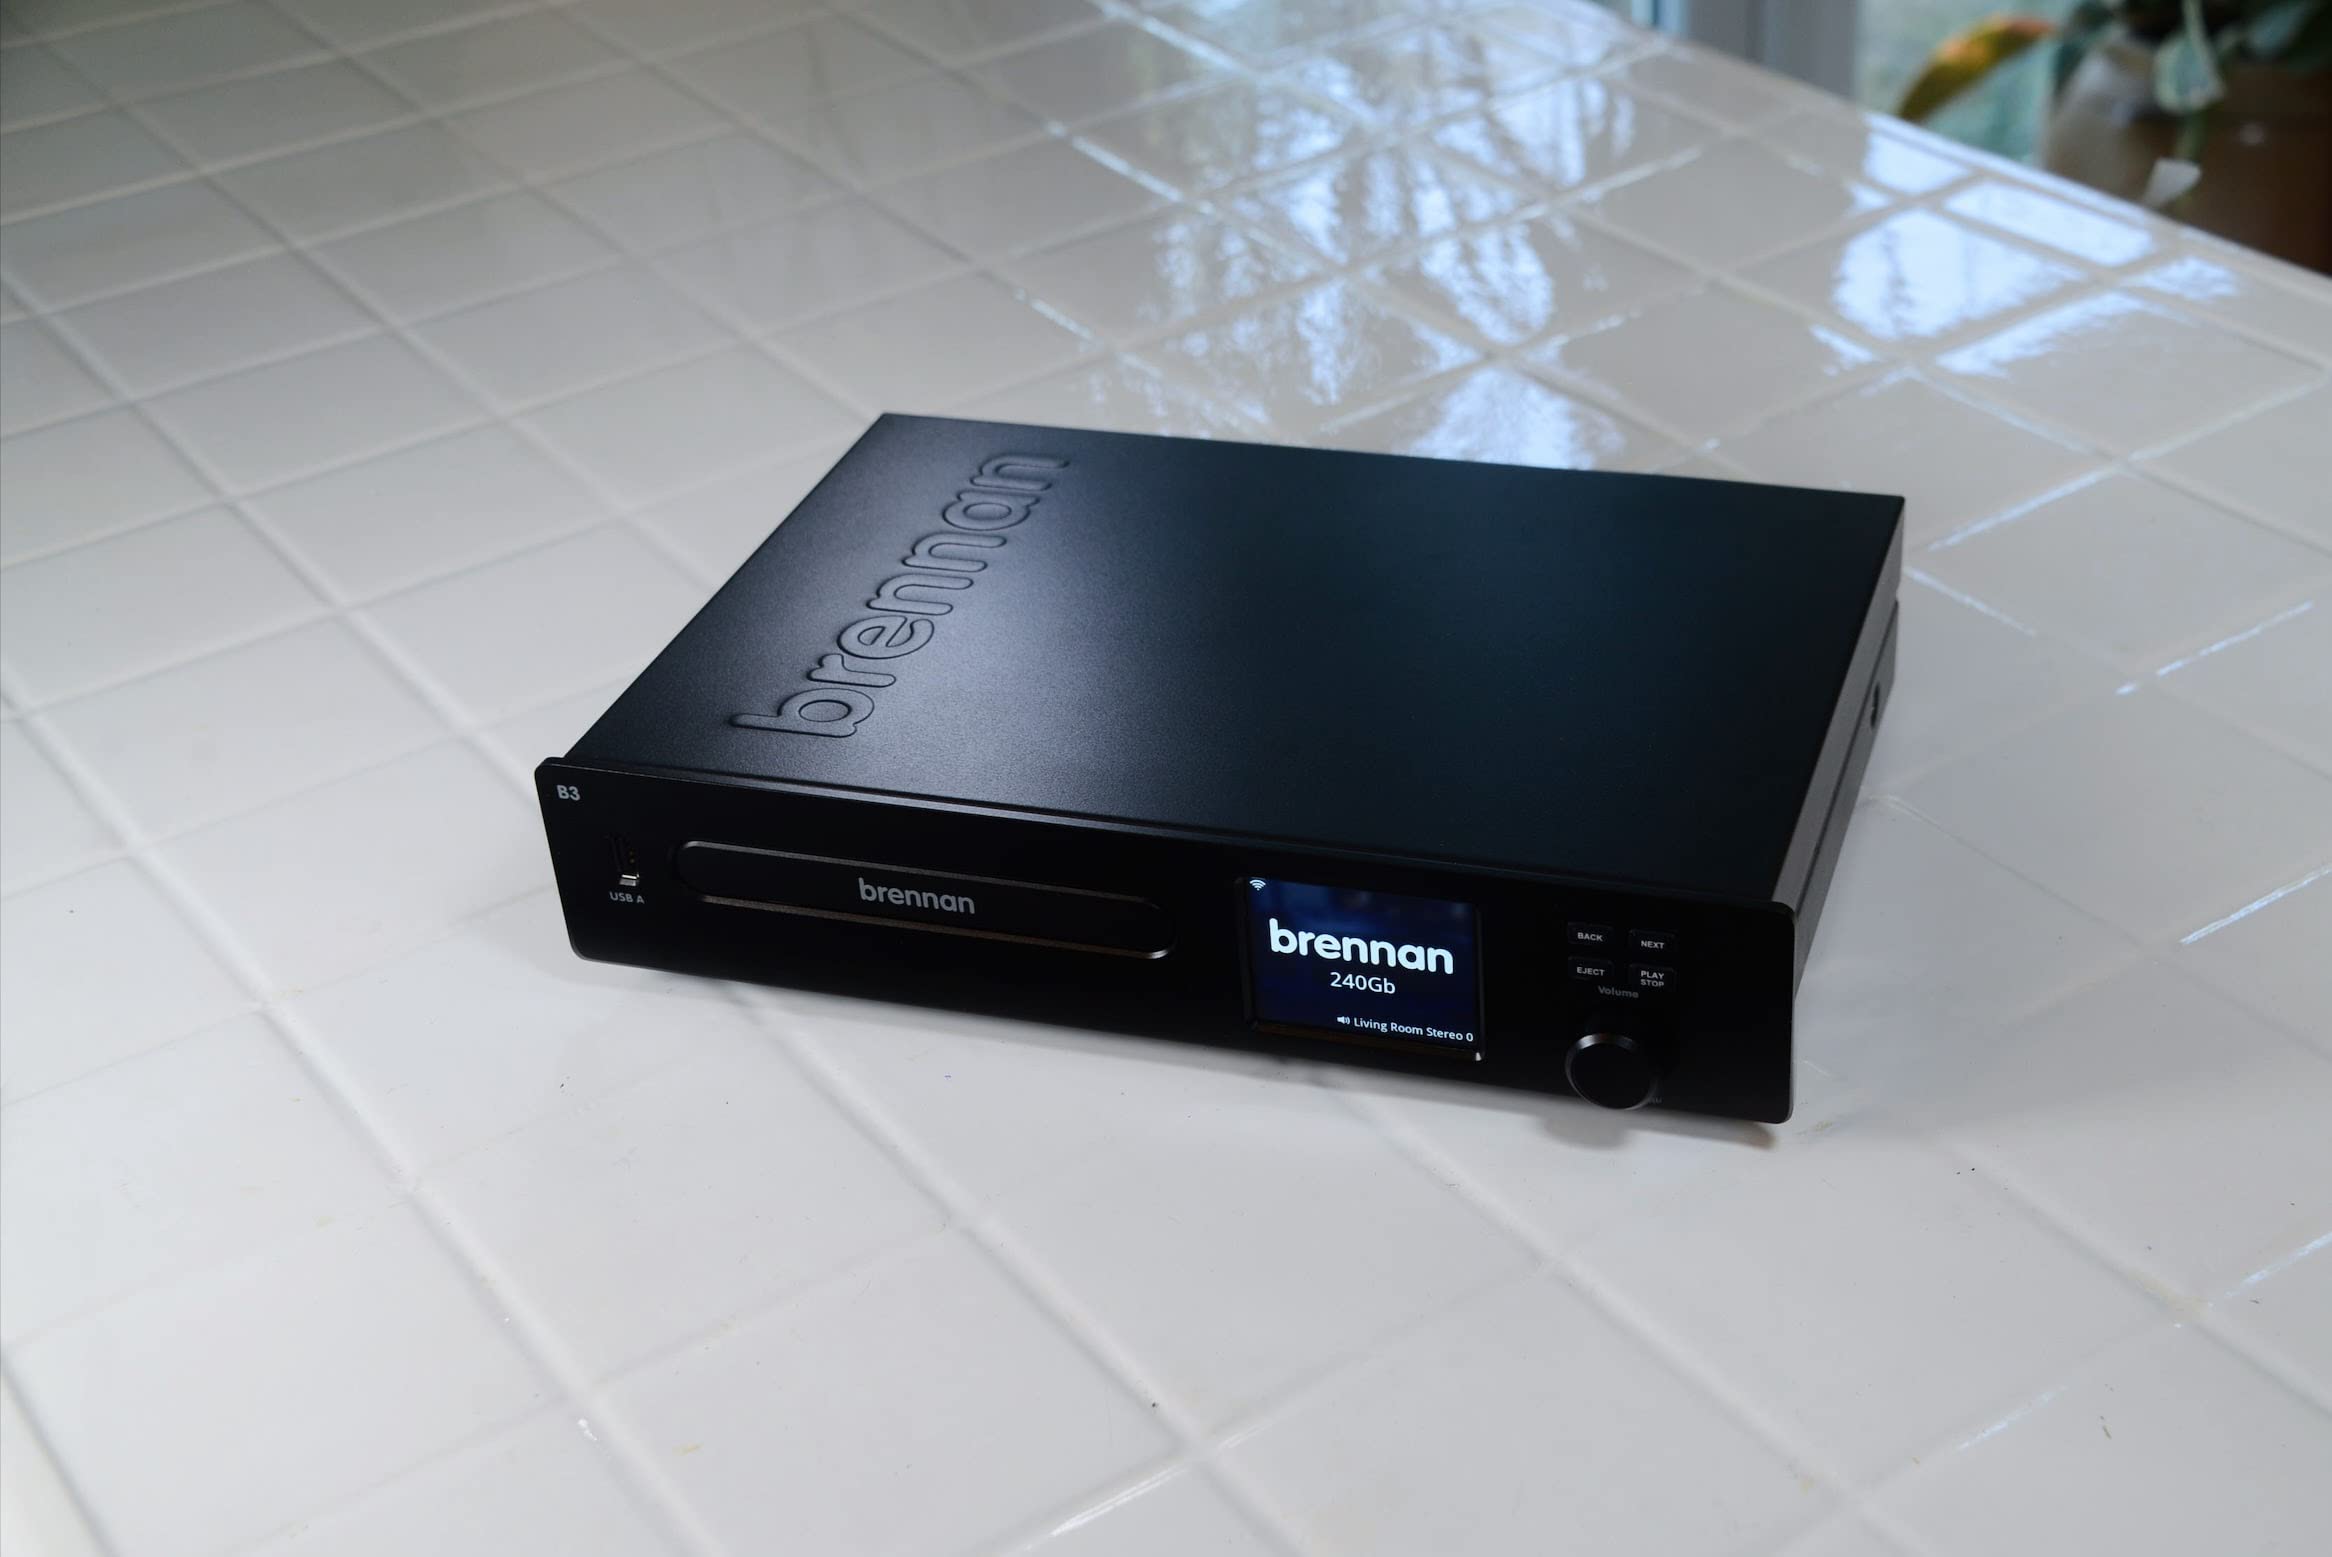 Brennan B3 (480GB Black) HiFi - Hard Disk CD Ripper & Recorder, Storage and Player with Bluetooth, Internet Radio, Stereo Power Amplifier, NAS, Wav, Lossless (FLAC) and MP3.